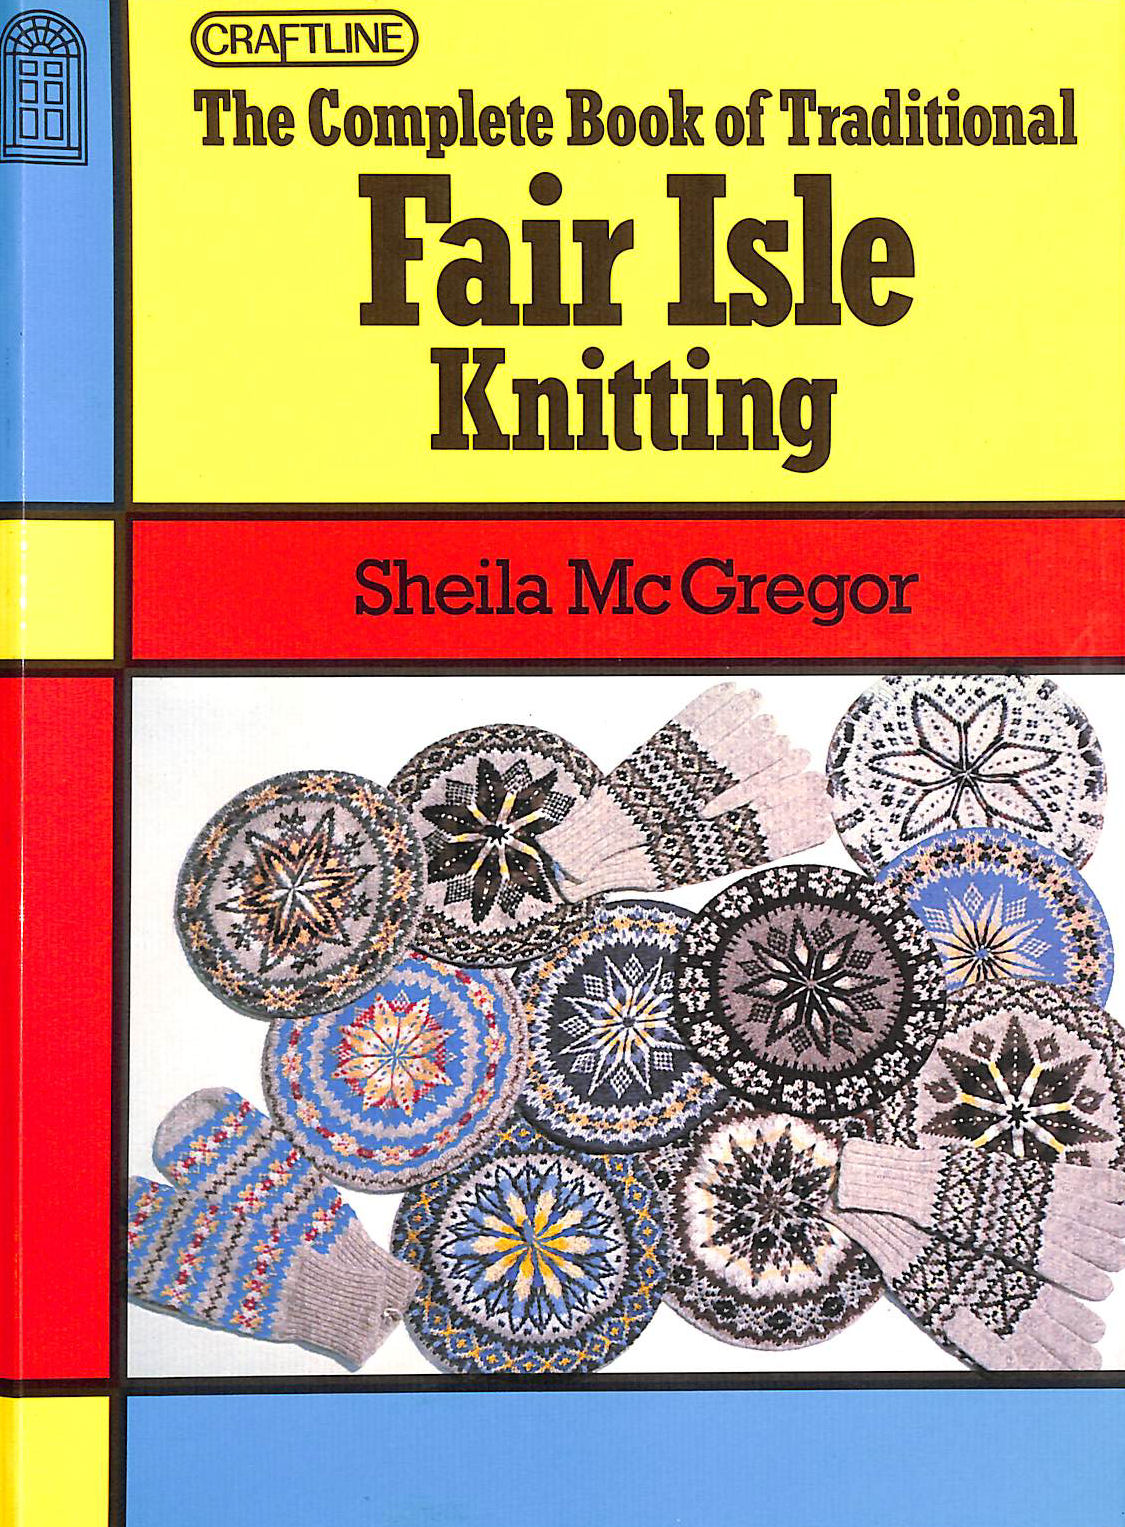 MCGREGOR, SHEILA - The Complete Book of Traditional Fair Isle Knitting (Craftline S.)